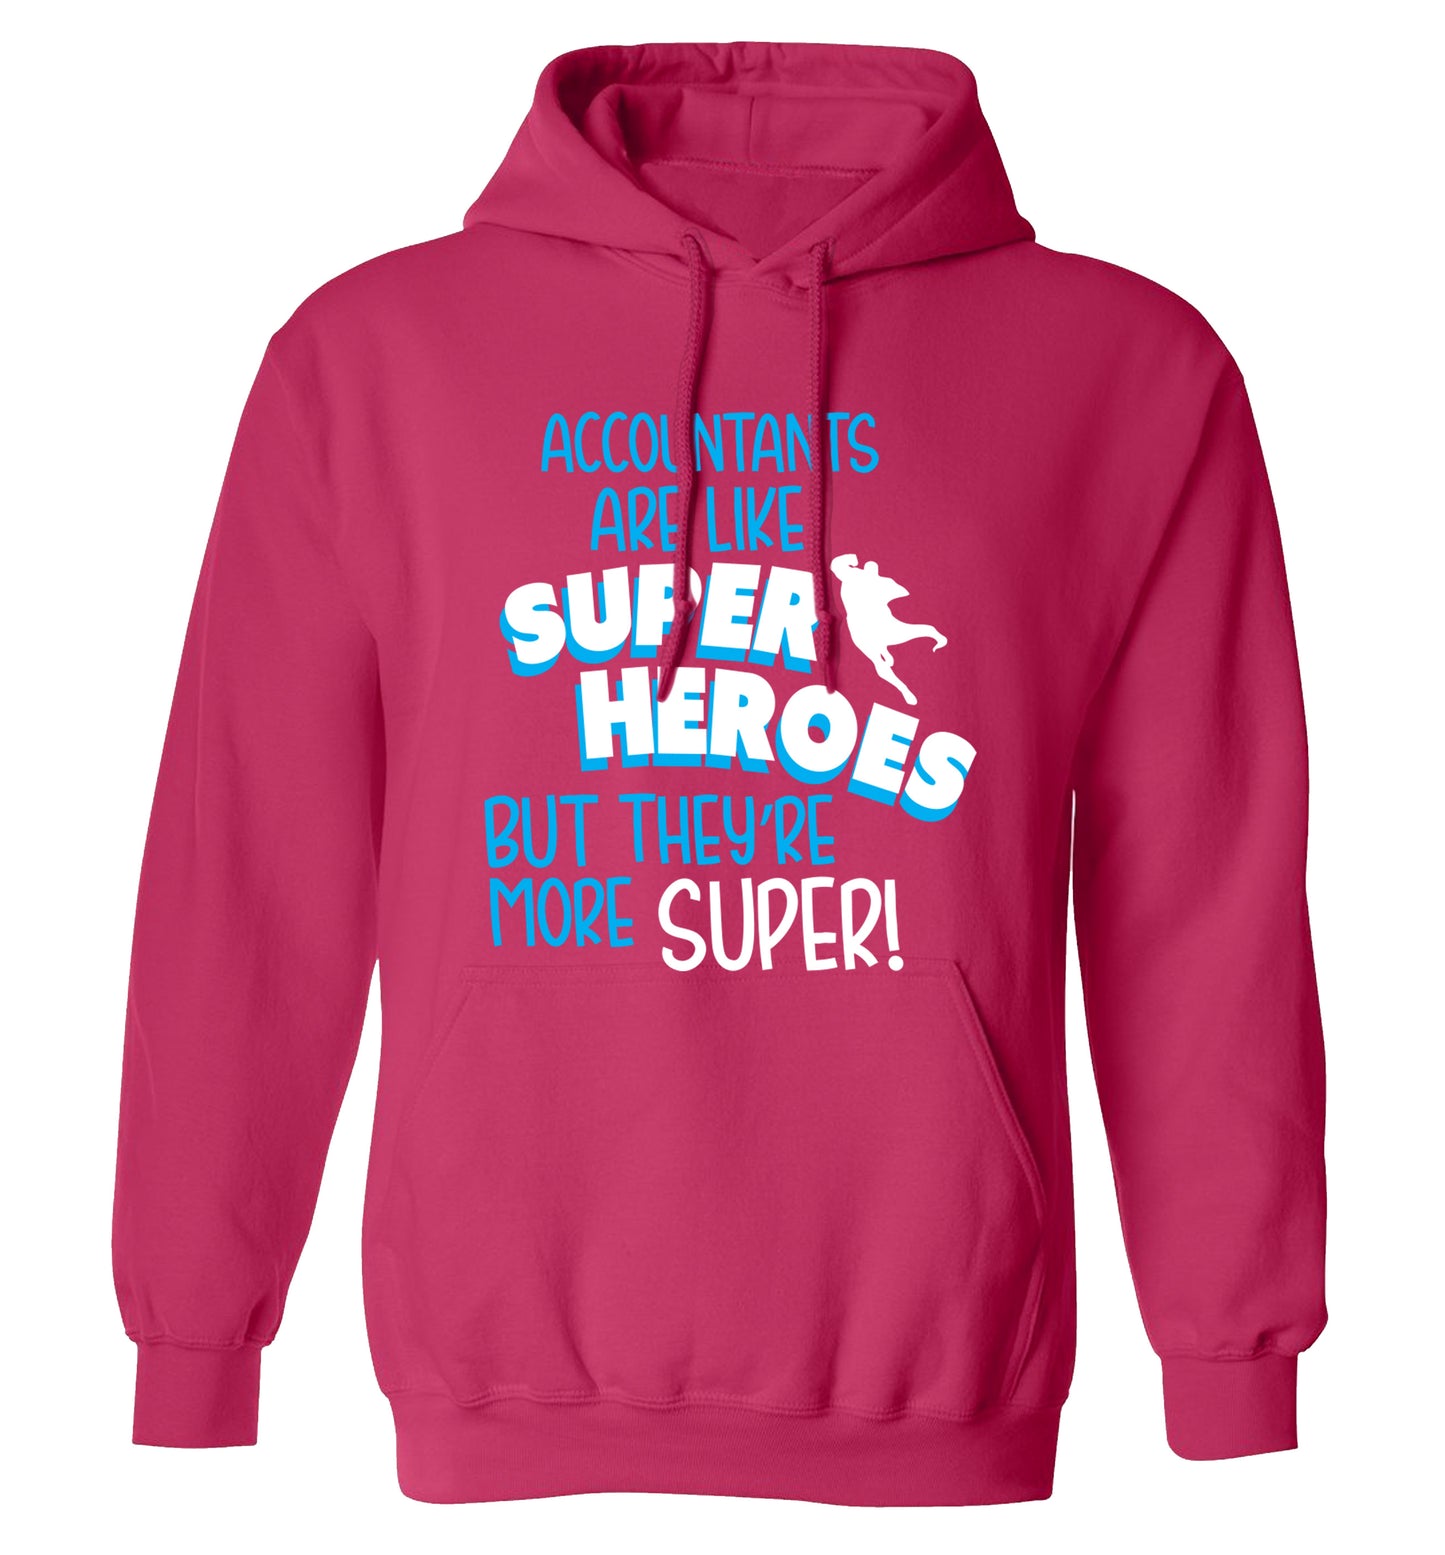 Accountants are like superheroes but they're more super adults unisex pink hoodie 2XL